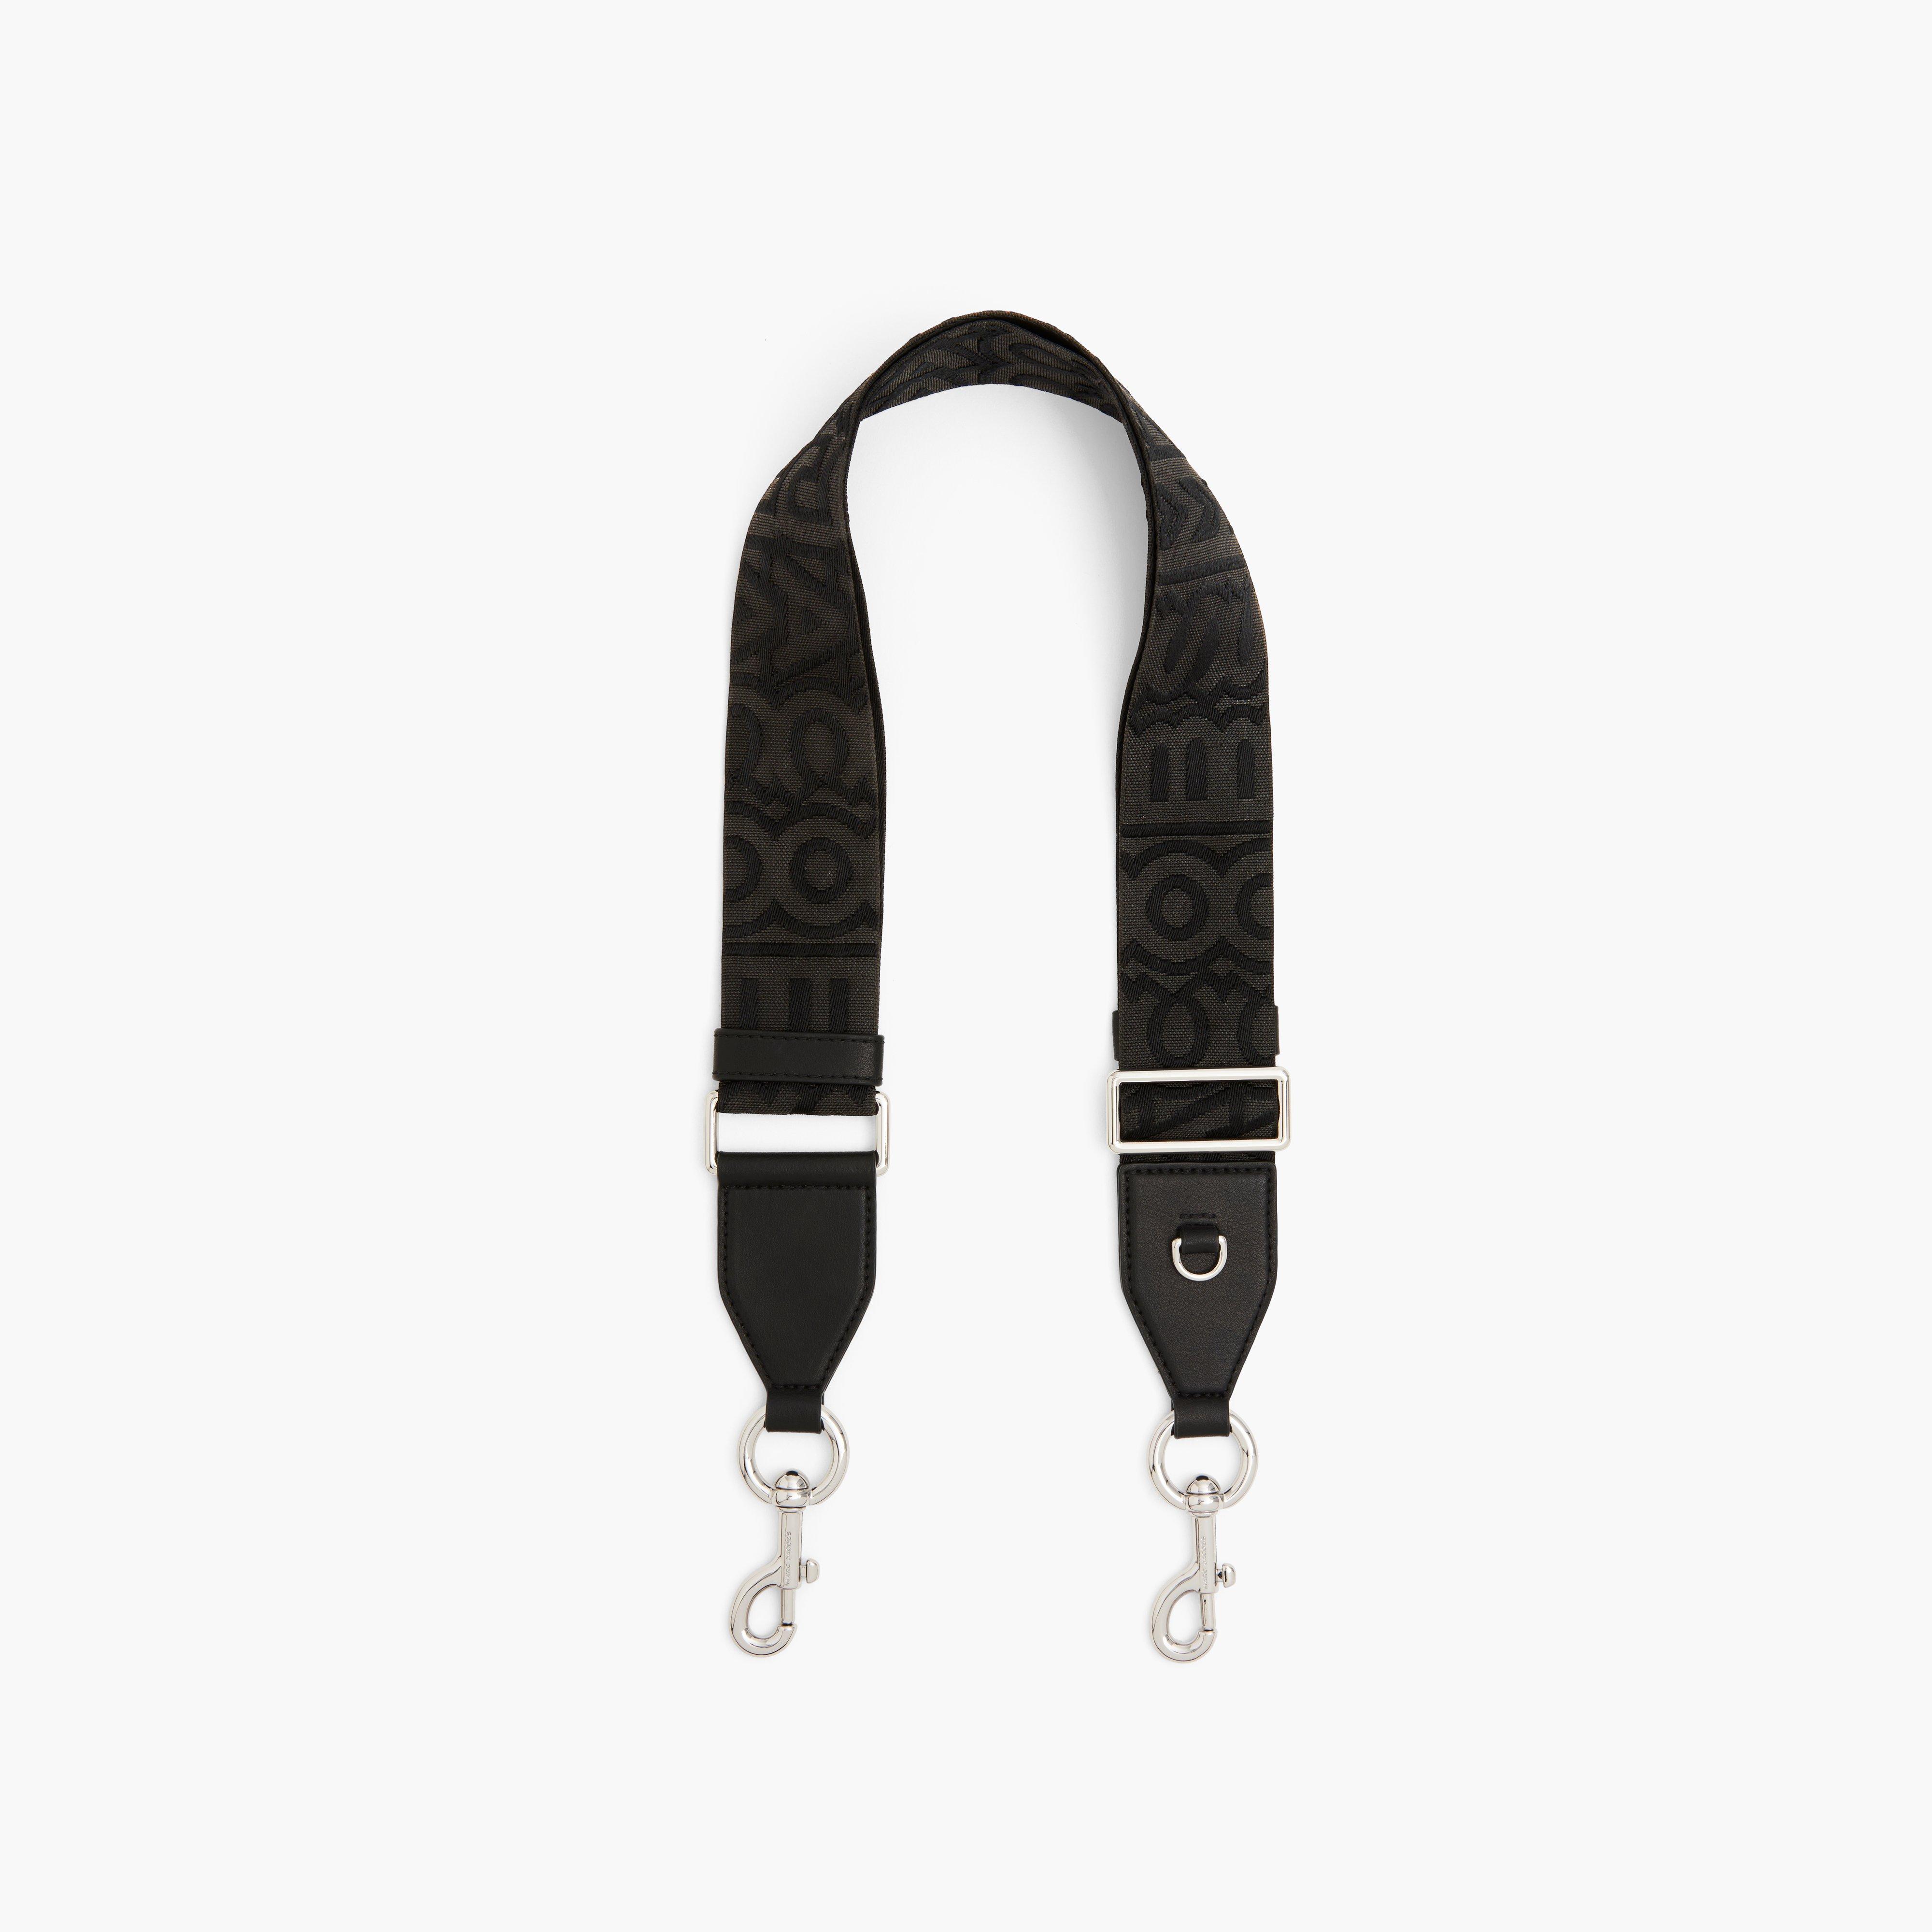 Marc by Marc jacobs The Utility DTM Webbing Strap,BLACK